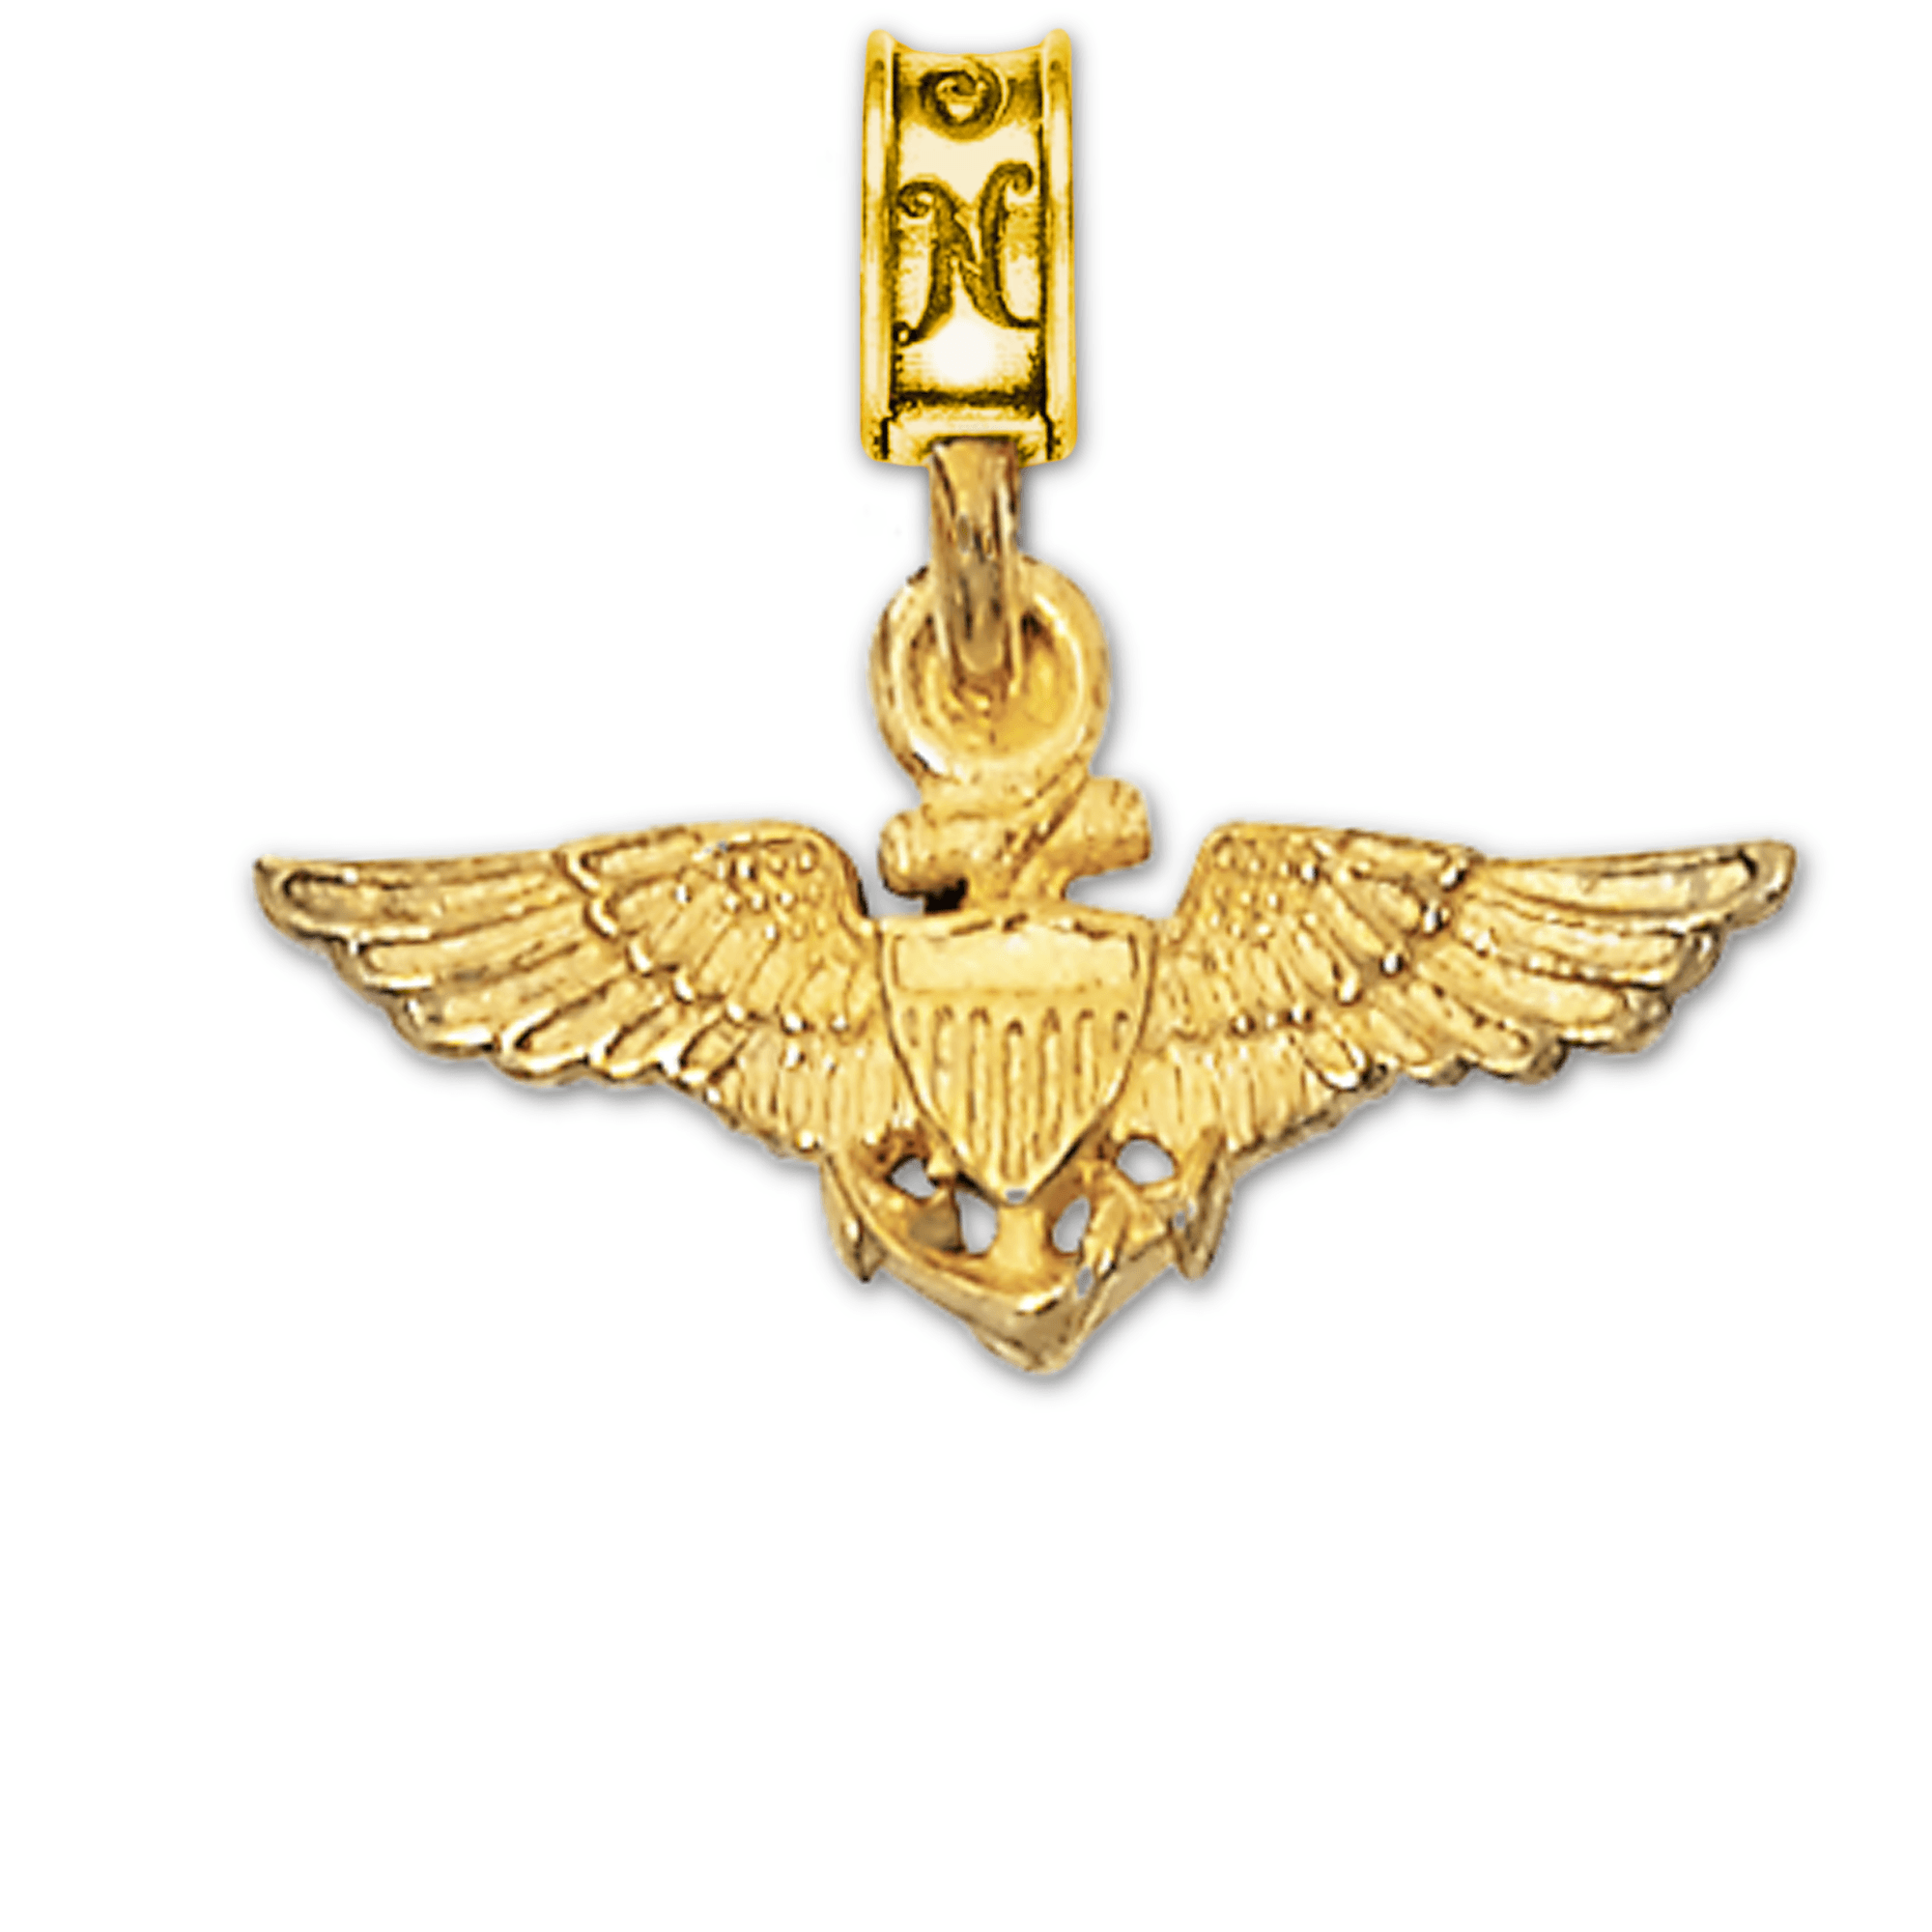 Military Jewelry, Military Charms, Navy, USN, Military Gifts, Naval Aviation Wings Charm Gold